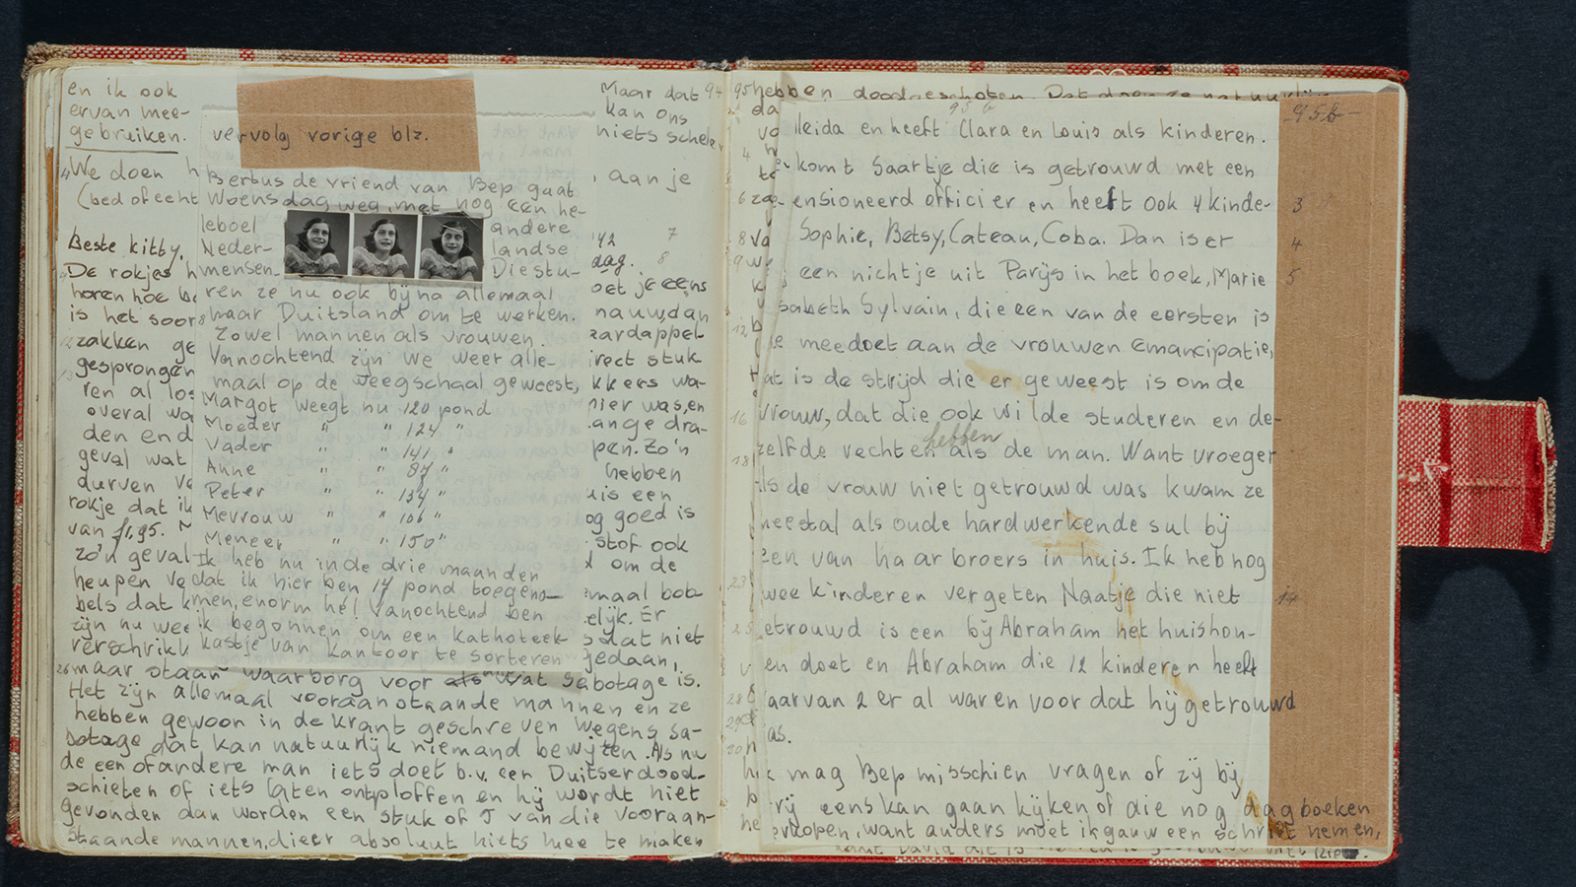 Two pages from the diary, written in 1942. "Her inner life and her voice seem almost shockingly contemporary, astonishingly similar to the voices of the teenagers we know," said Francine Prose, author of "Anne Frank: The Book, the Life, the Afterlife."